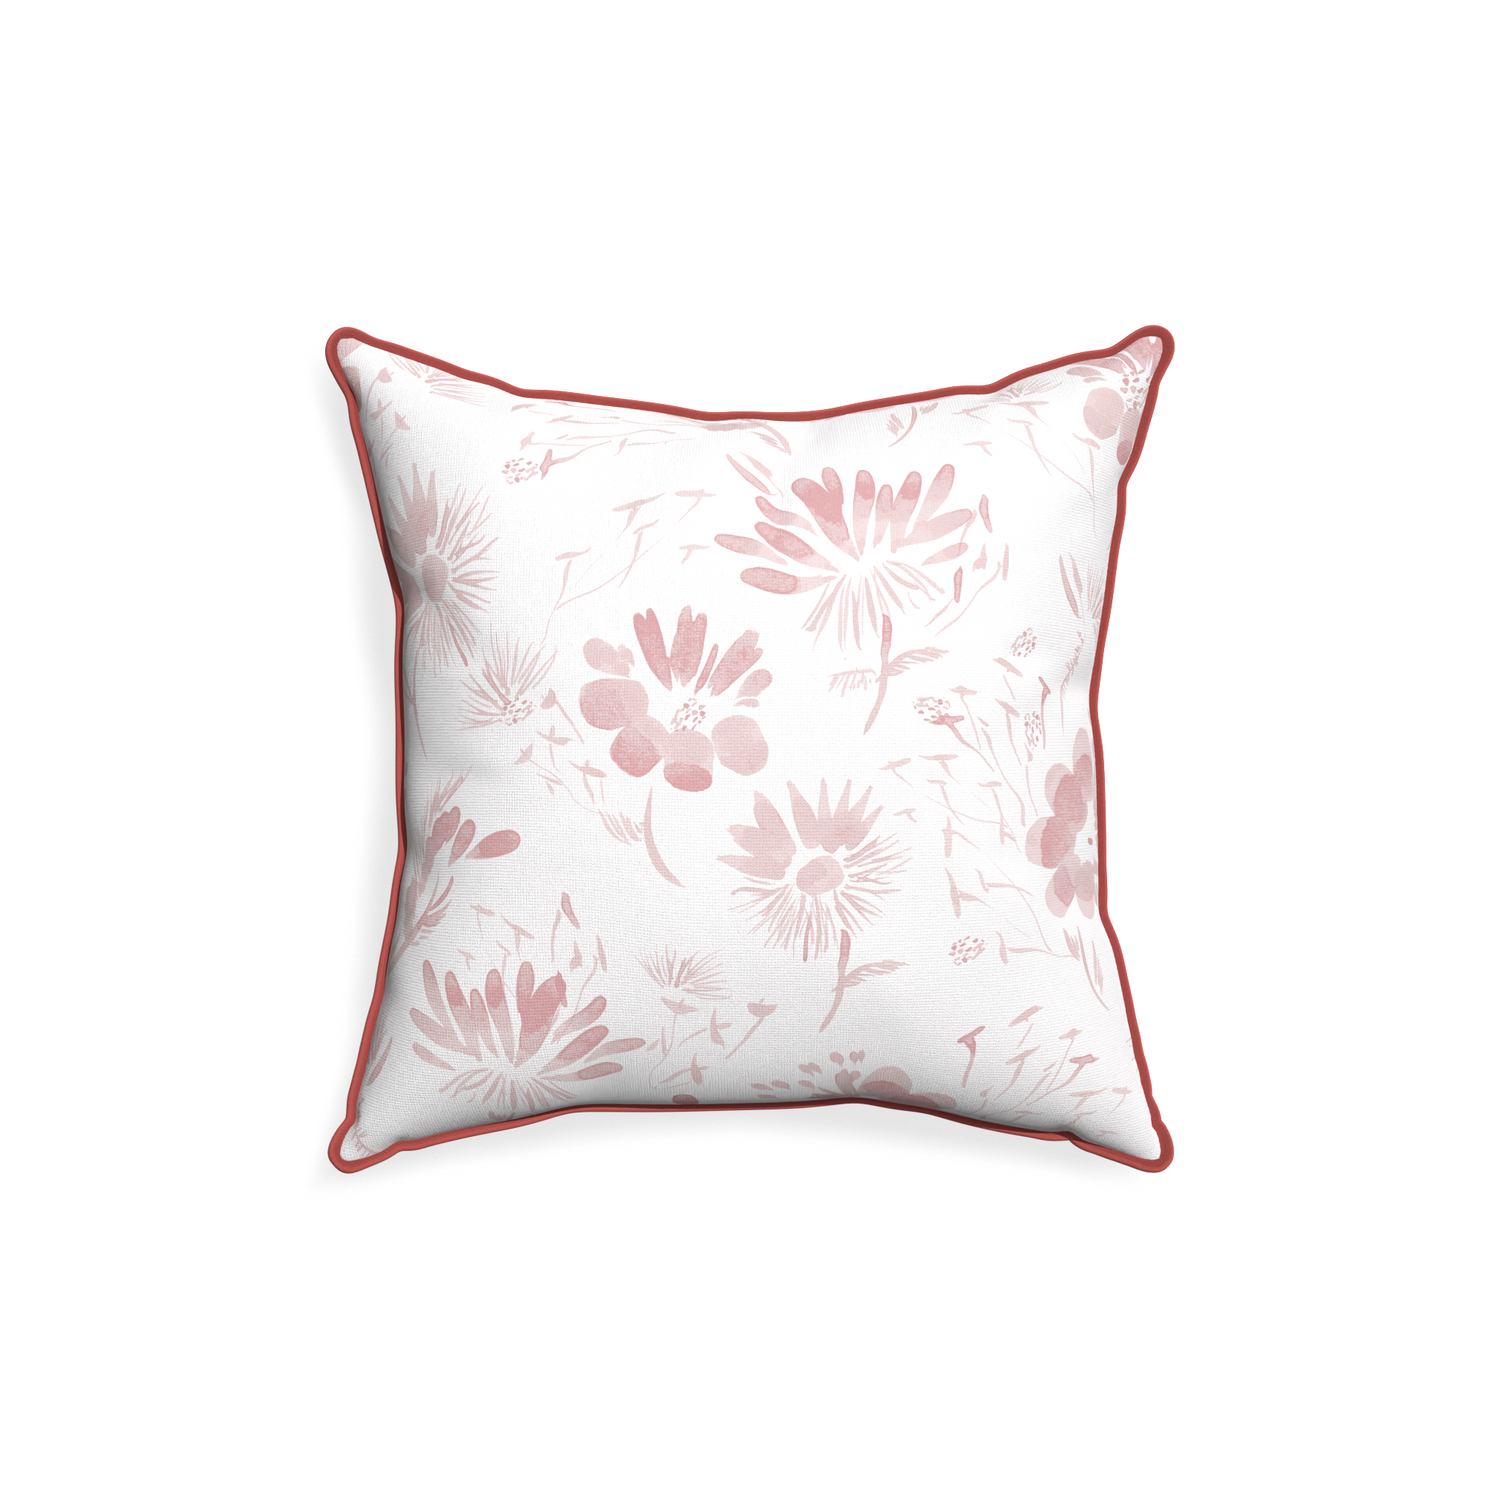 18-square blake custom pillow with c piping on white background